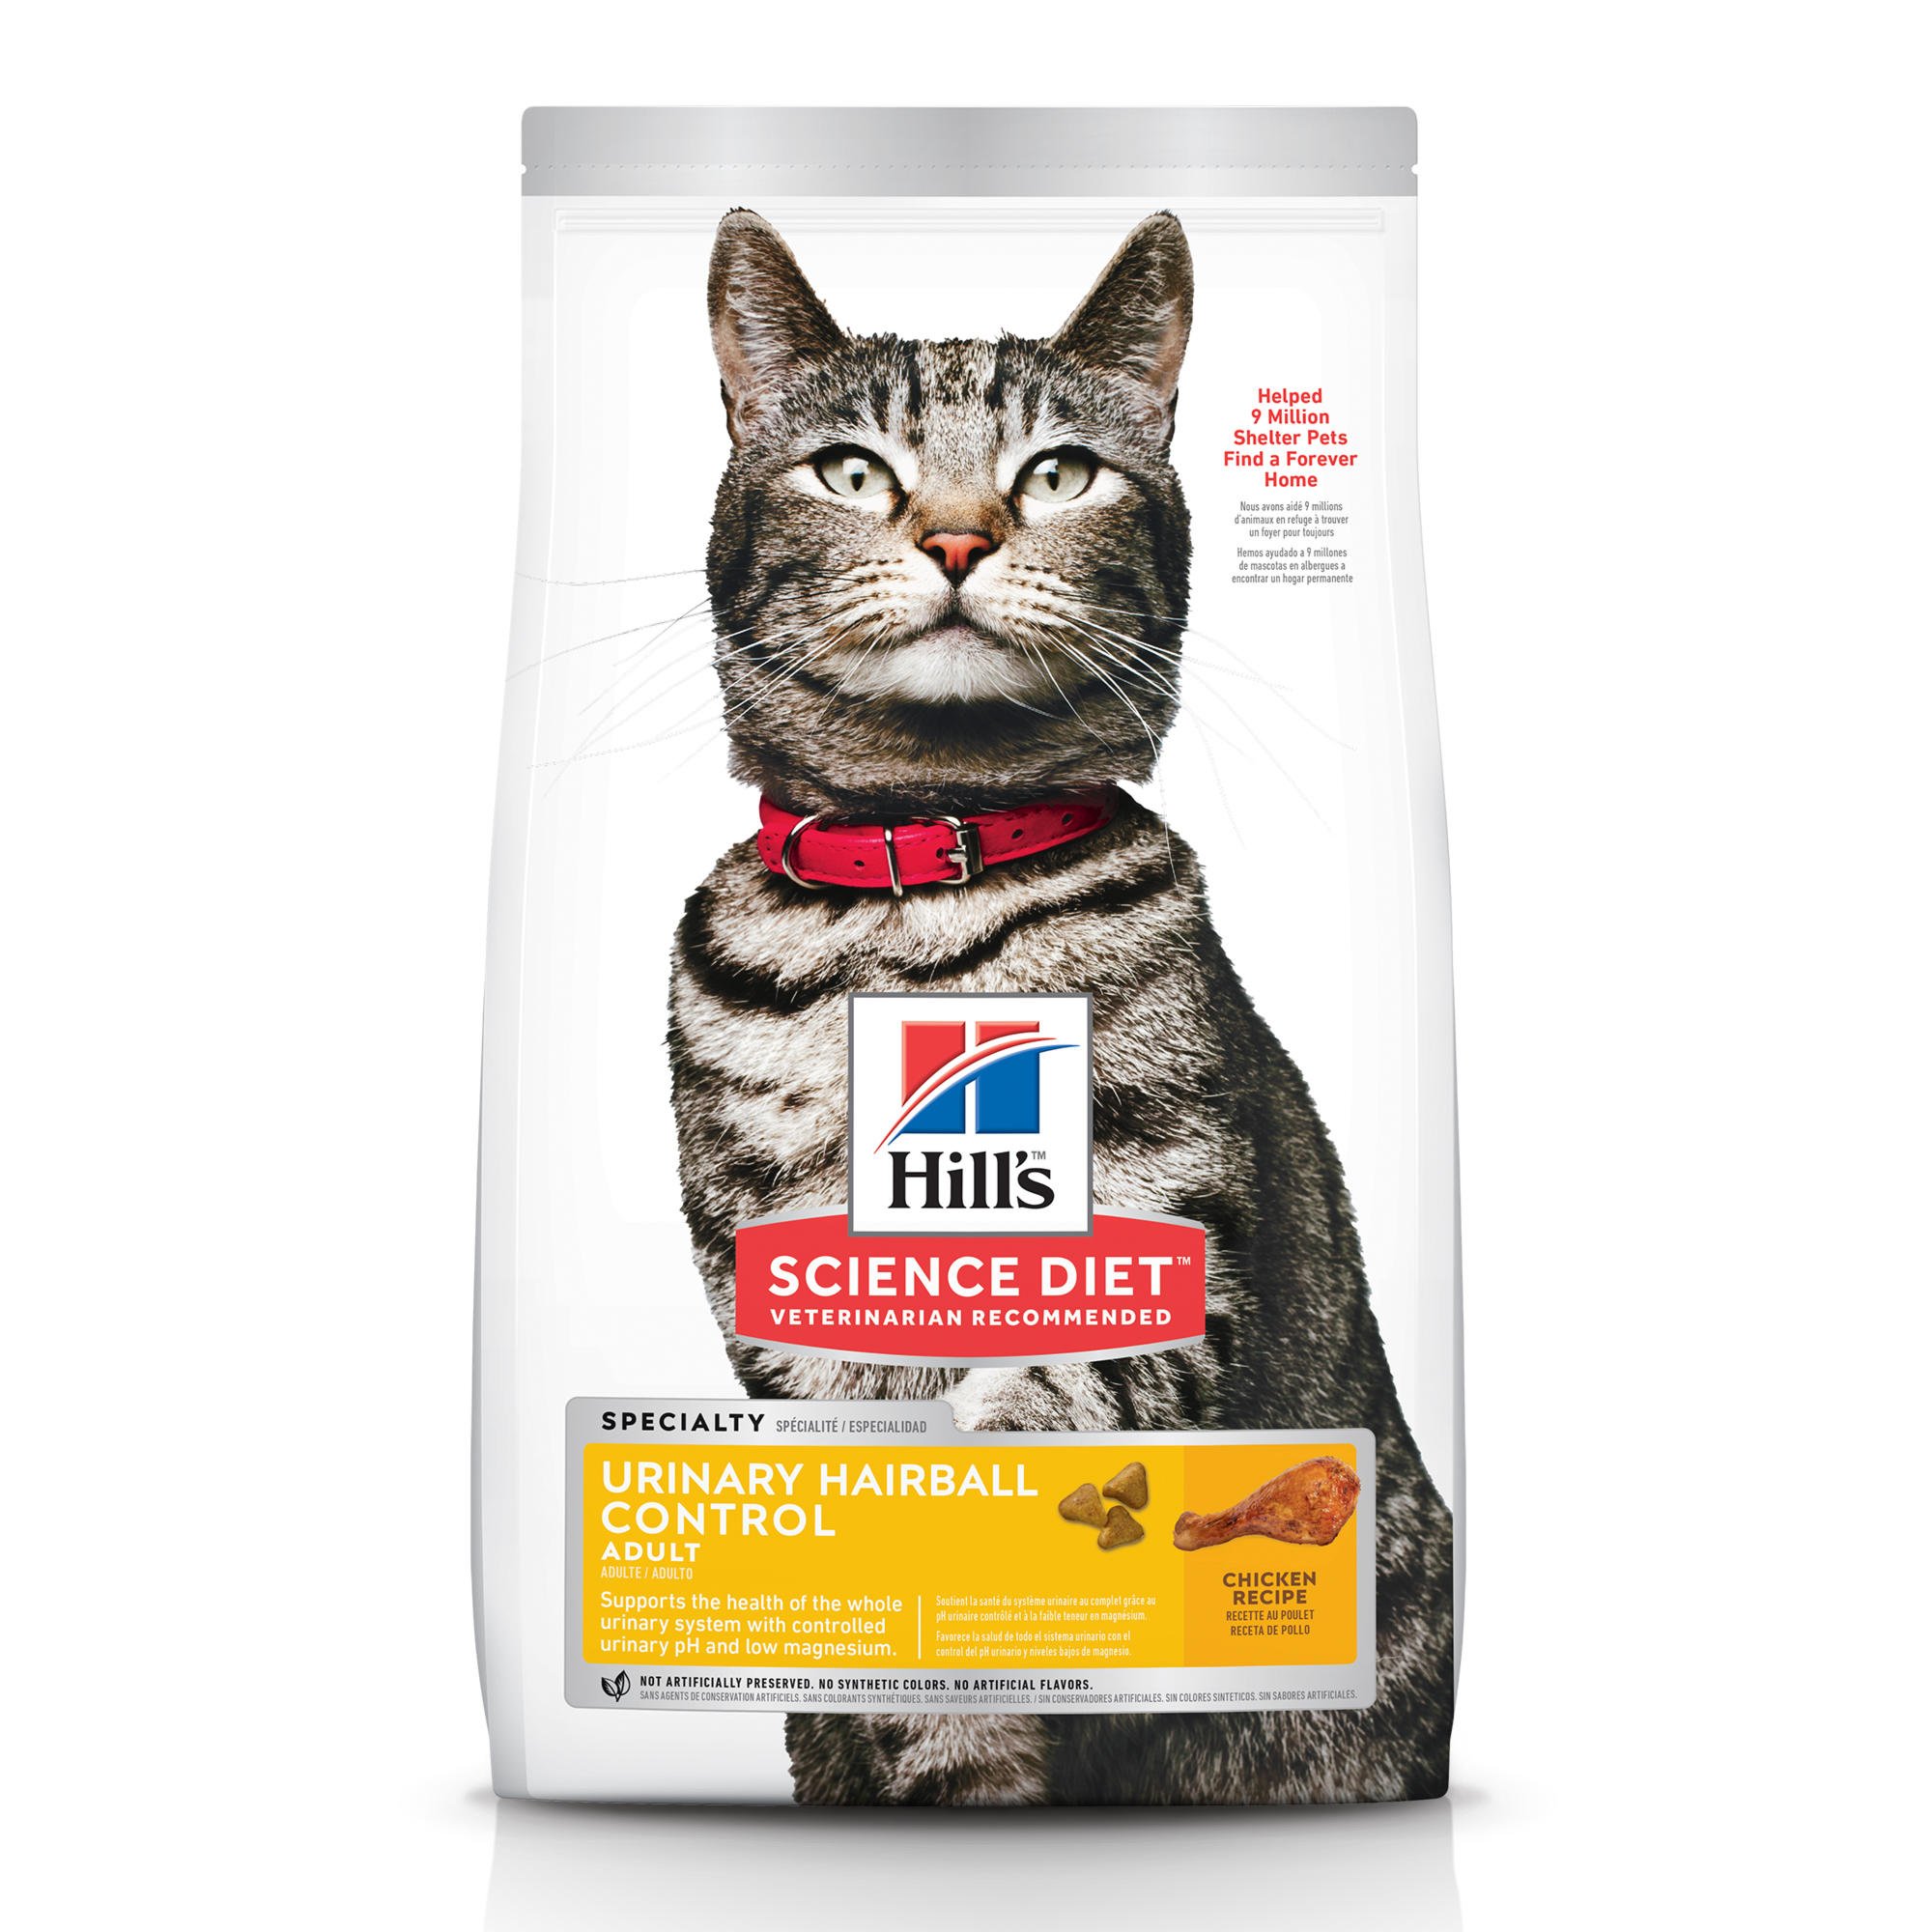 Hill's Science Diet Urinary Hairball Control Adult Chicken Cat Food, 3